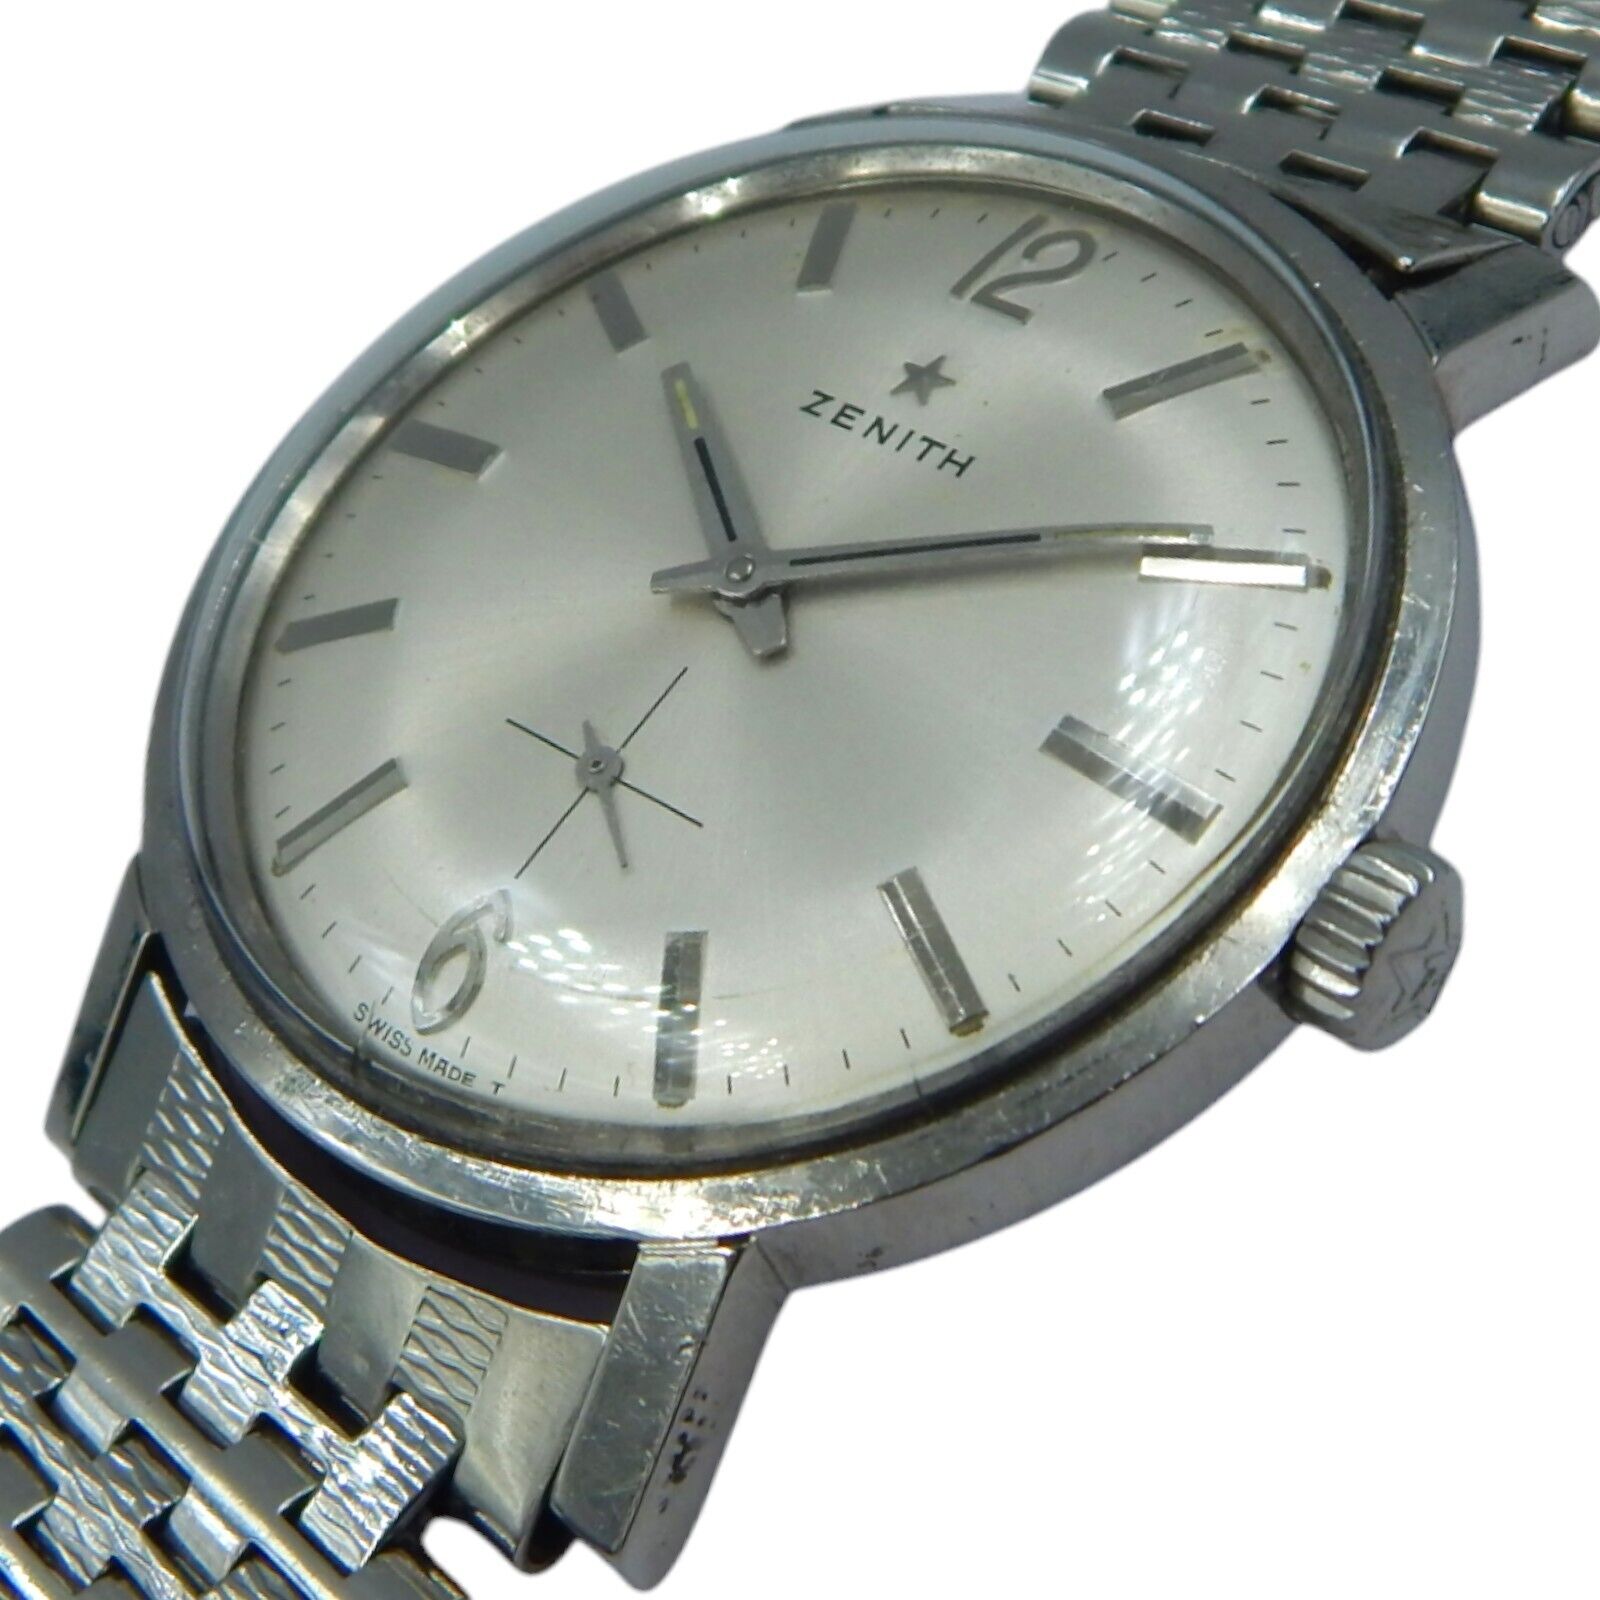 Vintage Zenith Cal 2541 Men\'s Watch - Excellent Condition from 1960